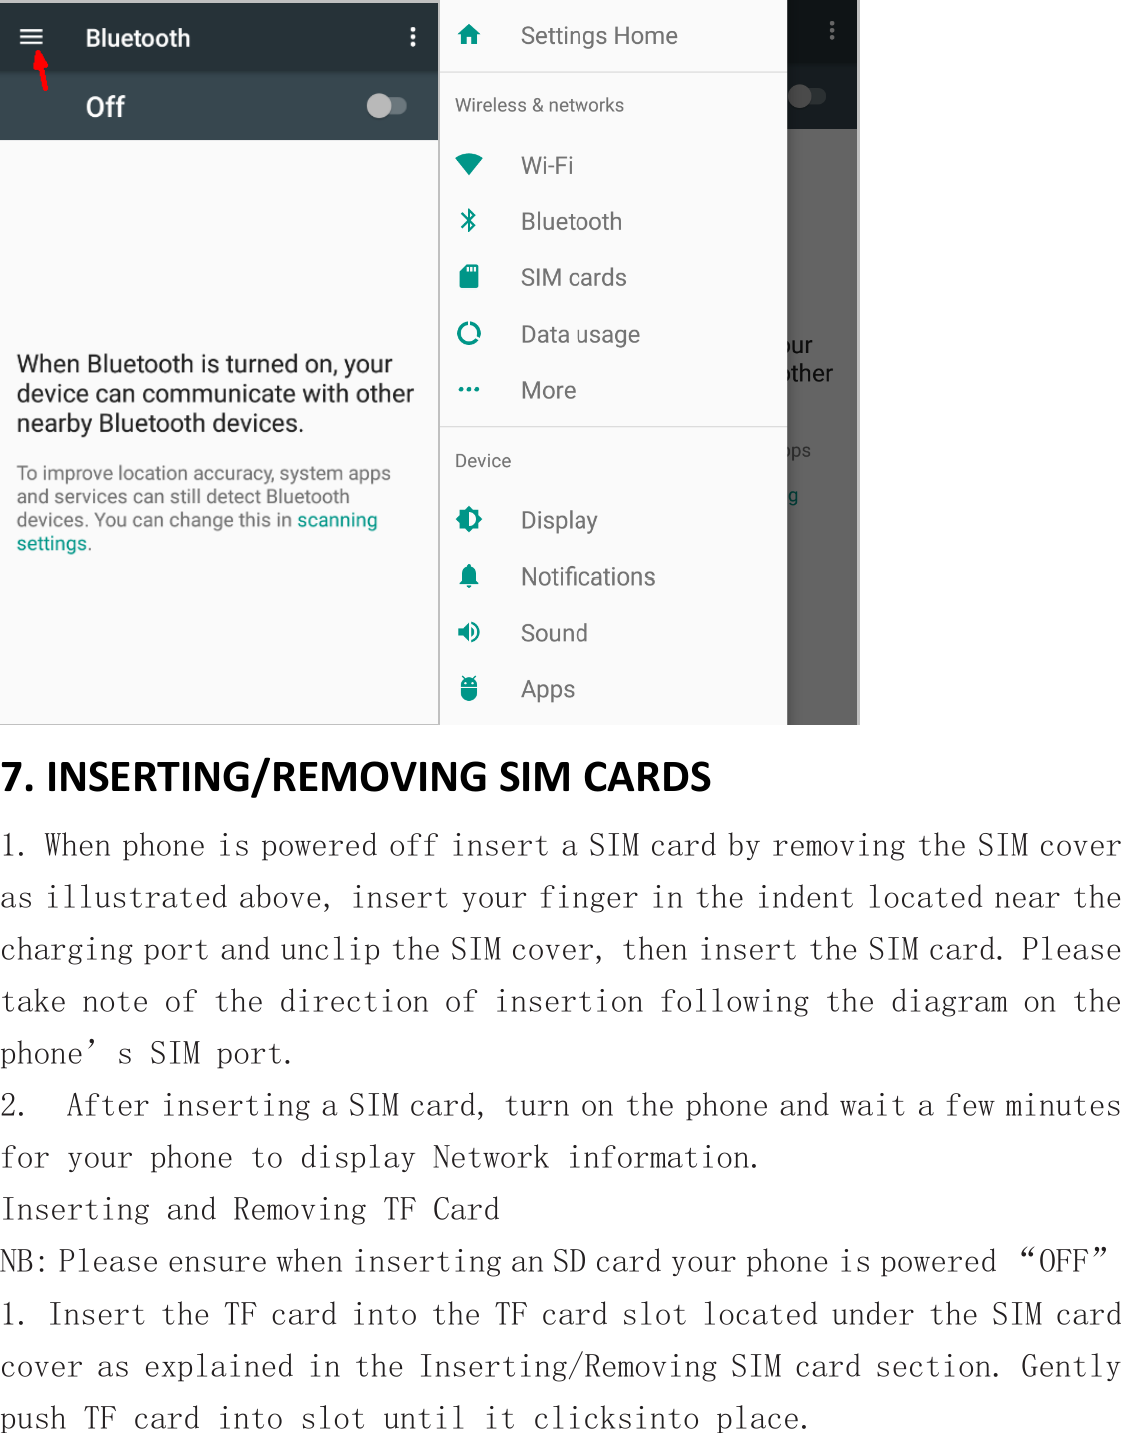  7. INSERTING/REMOVING SIM CARDS 1. When phone is powered off insert a SIM card by removing the SIM cover as illustrated above, insert your finger in the indent located near the charging port and unclip the SIM cover, then insert the SIM card. Please take note of the direction of insertion following the diagram on the phone’s SIM port.   2.  After inserting a SIM card, turn on the phone and wait a few minutes for your phone to display Network information. Inserting and Removing TF Card  NB: Please ensure when inserting an SD card your phone is powered “OFF” 1. Insert the TF card into the TF card slot located under the SIM card cover as explained in the Inserting/Removing SIM card section. Gently push TF card into slot until it clicksinto place. 